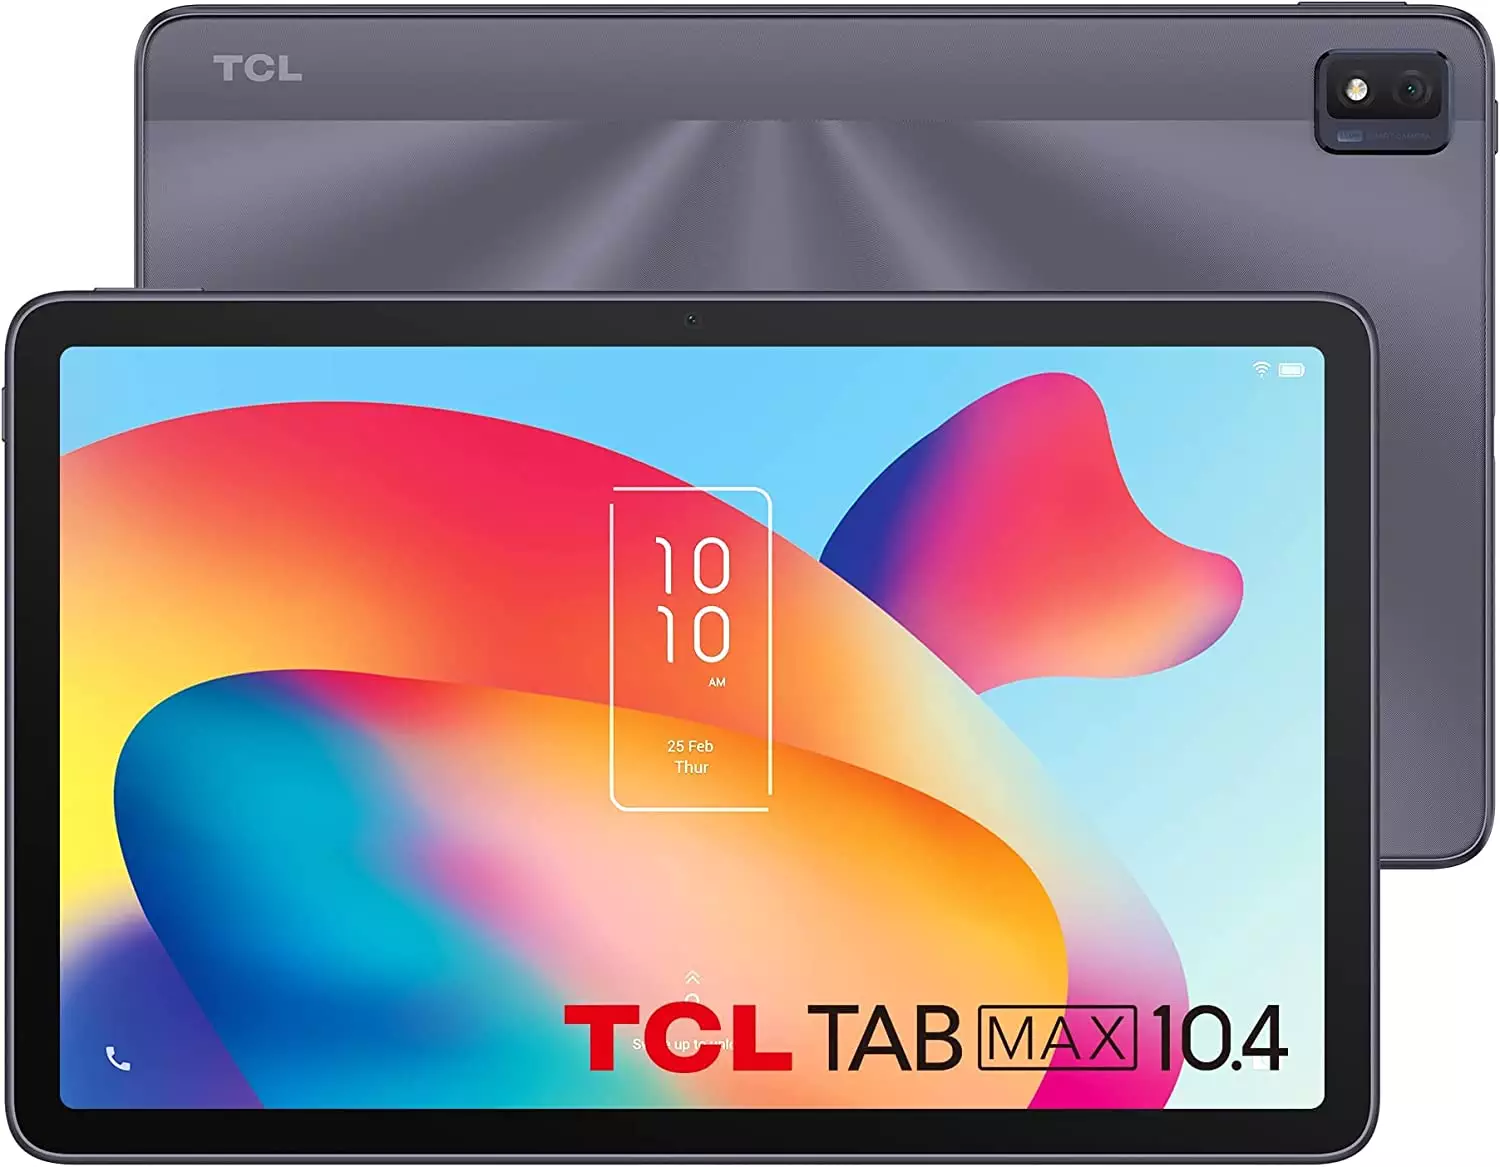 The Underatter Tcl Tabmax 10.4 Tablet Is Absolutely Amazing